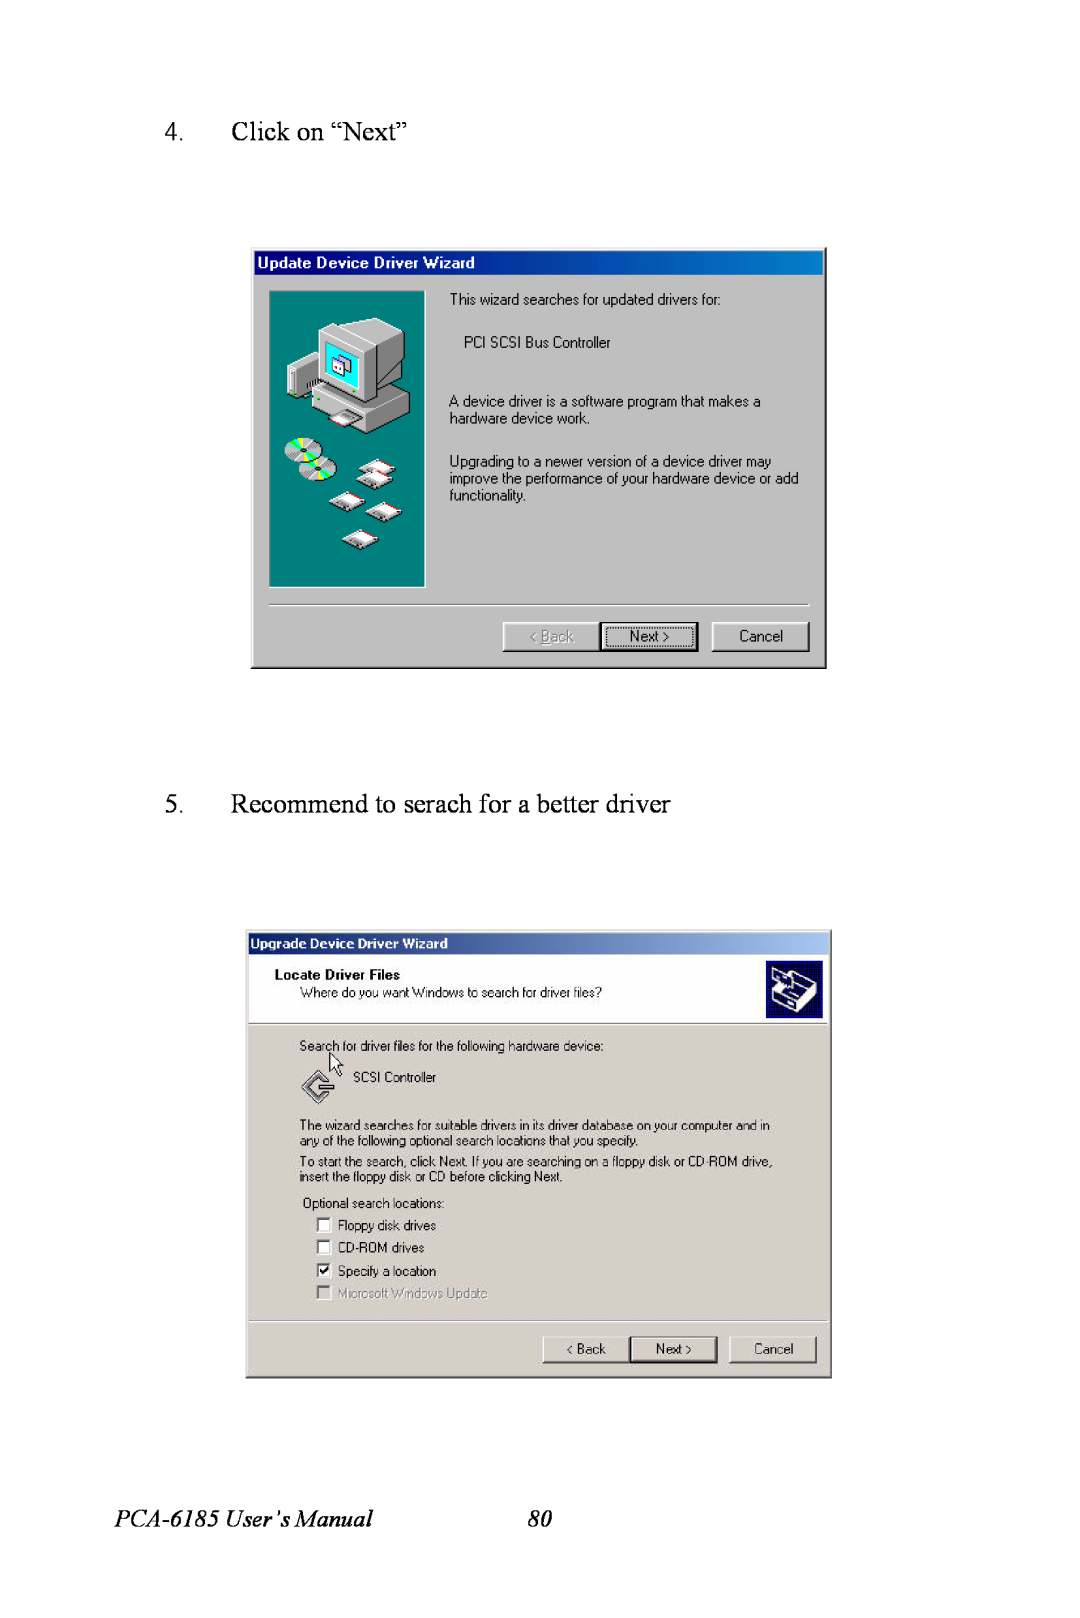 Advantech user manual Click on “Next” 5. Recommend to serach for a better driver, PCA-6185 User’s Manual 